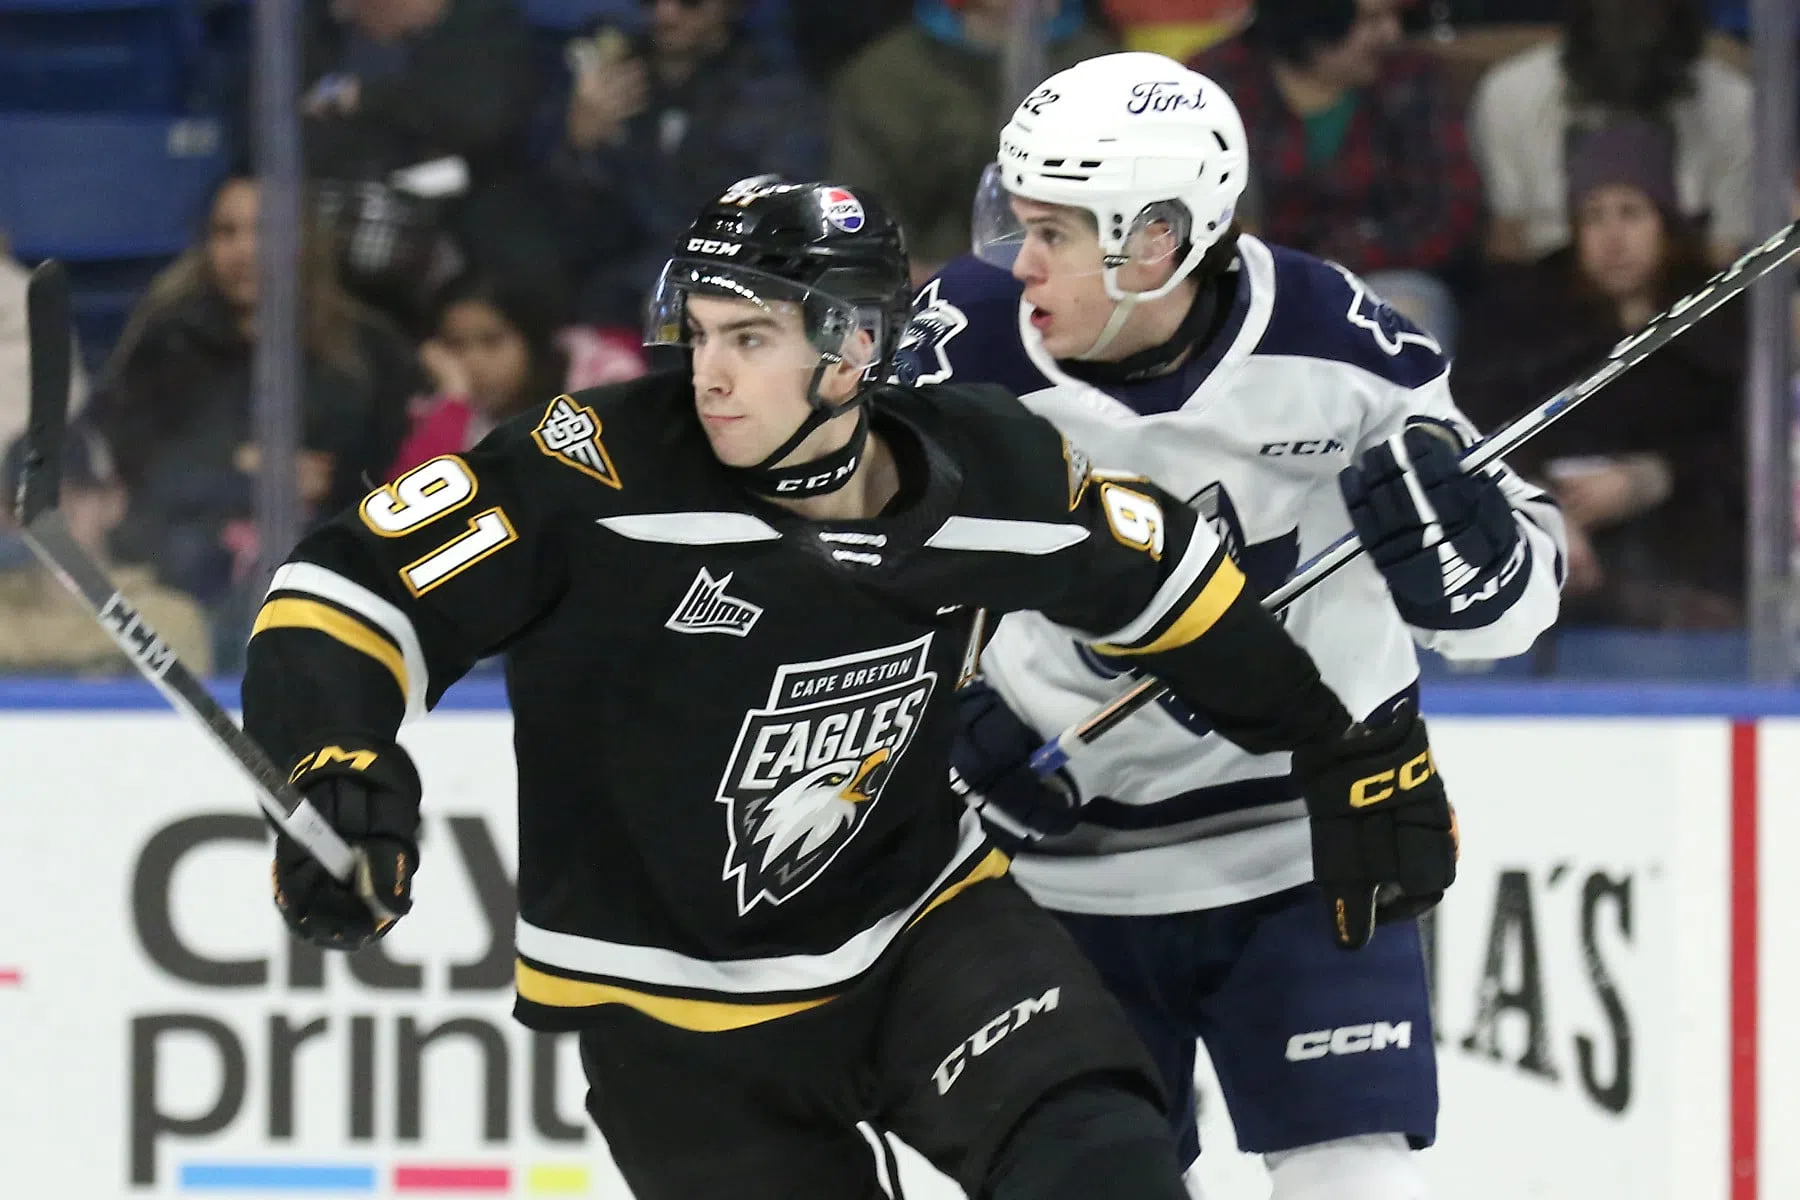 Eagles facing elimination in Baie-Comeau